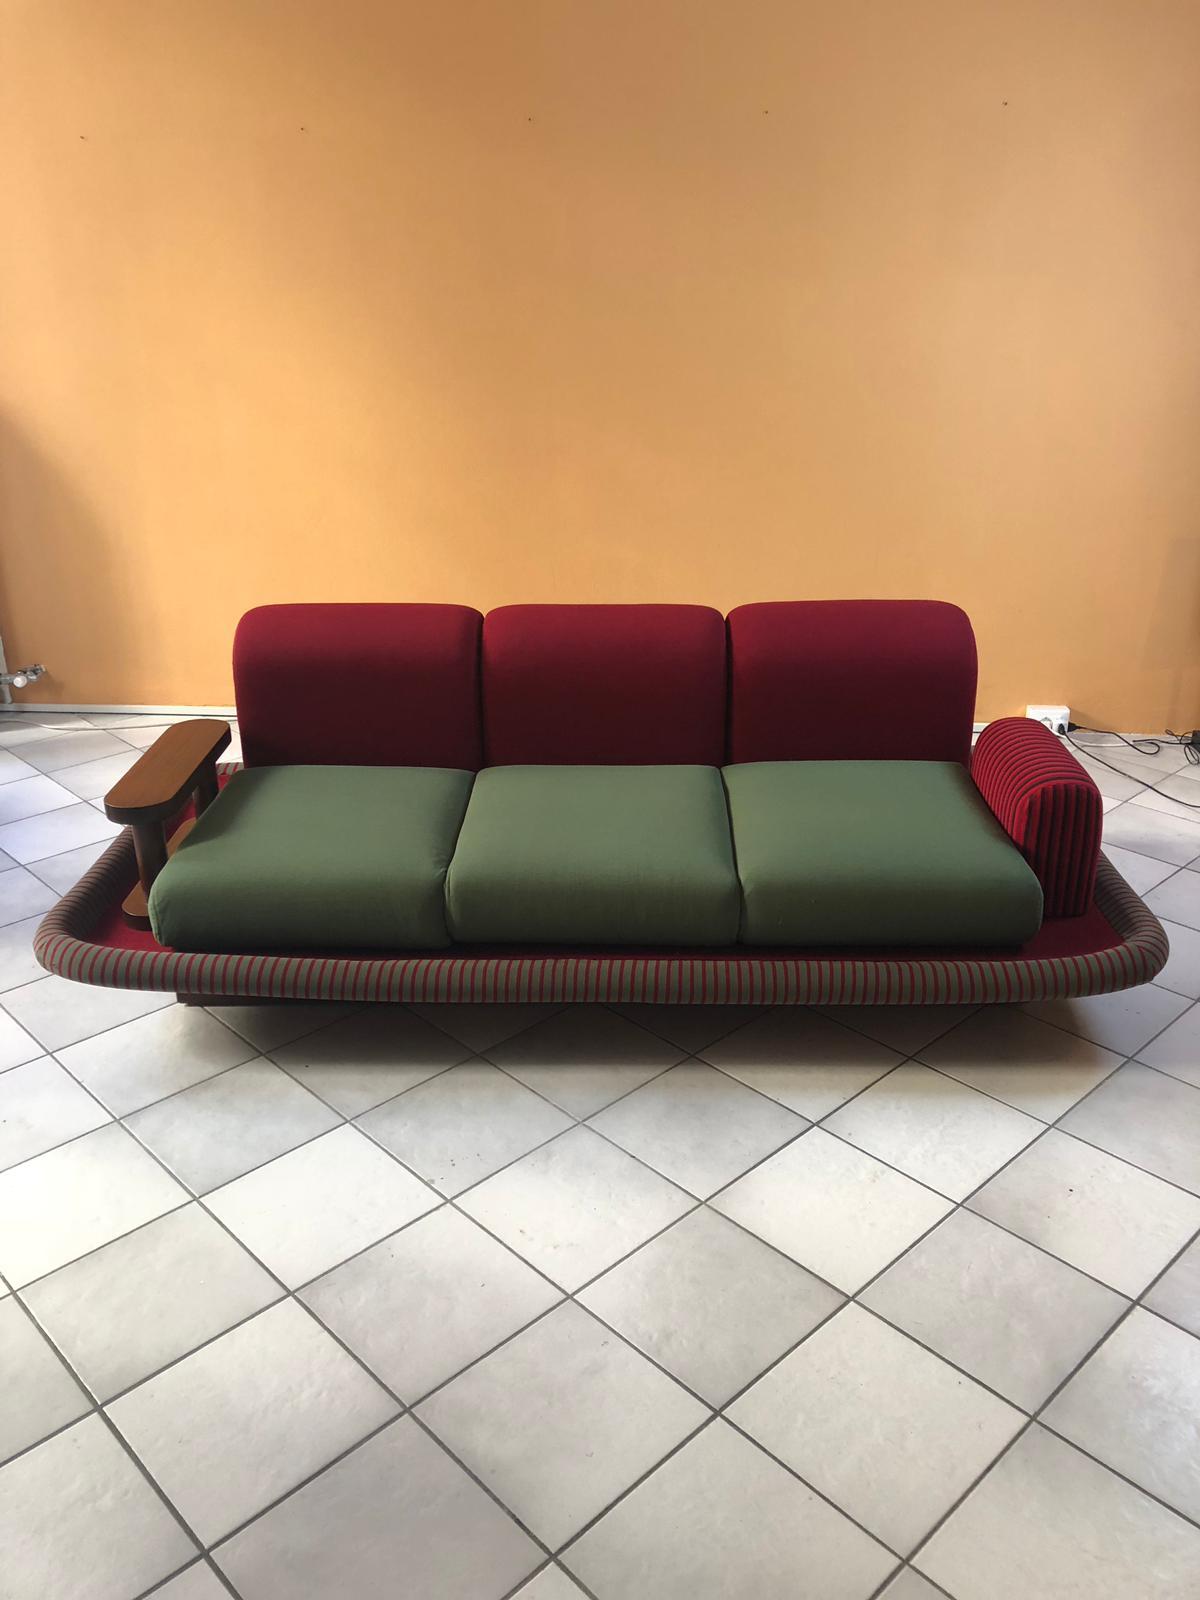 Rare, if not unique
Flying carpet sofa Ettore Sottsass,
circa 1974.
Measures: 217 x 107 x 65 cms
Published by bedding patentti Italy
Wood / fabrics / velvet / carpet
In a perfect state.

29000 Euros.